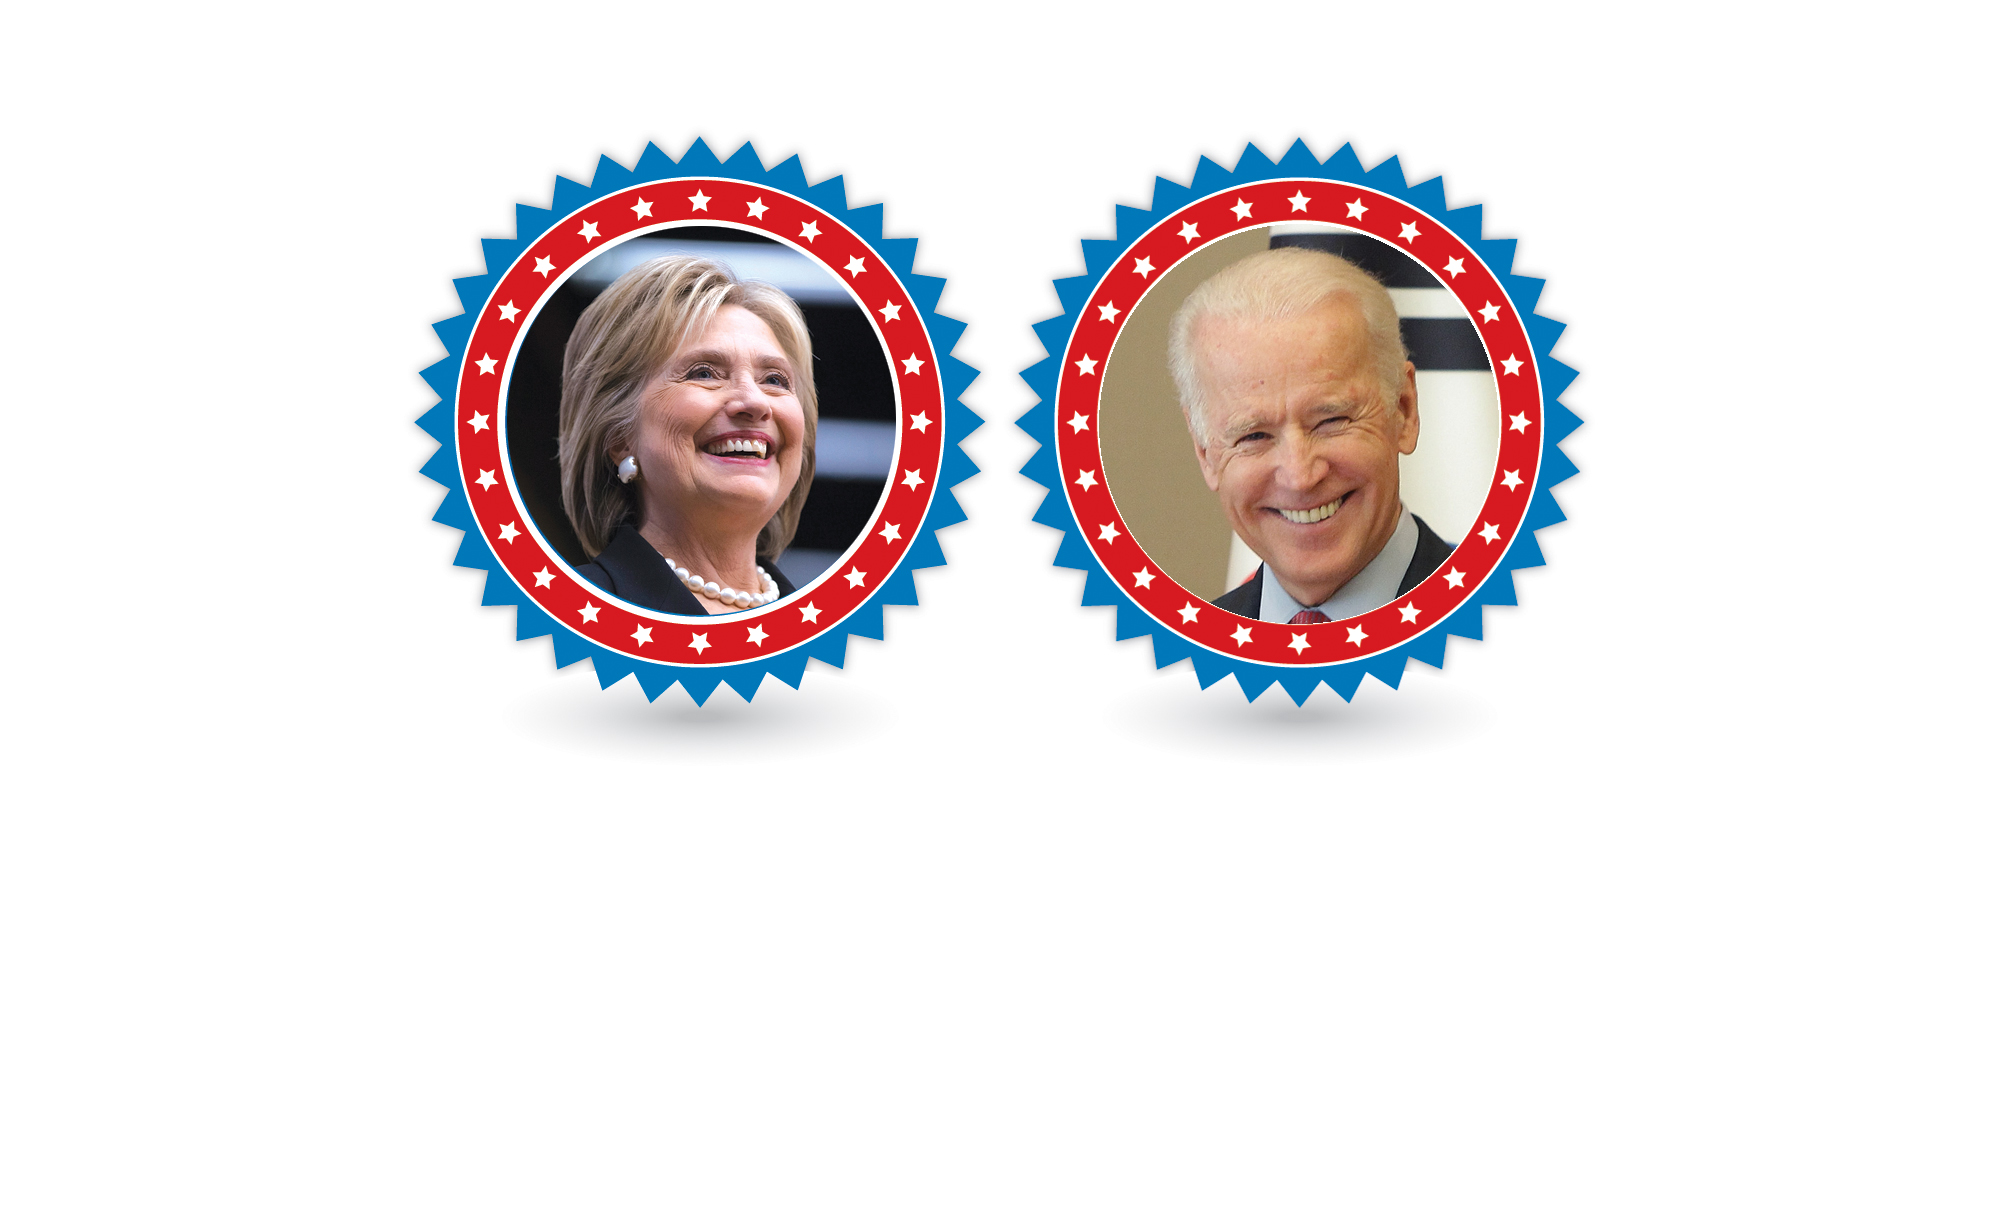 Hillary Clinton and Vice President Biden could make a great team.